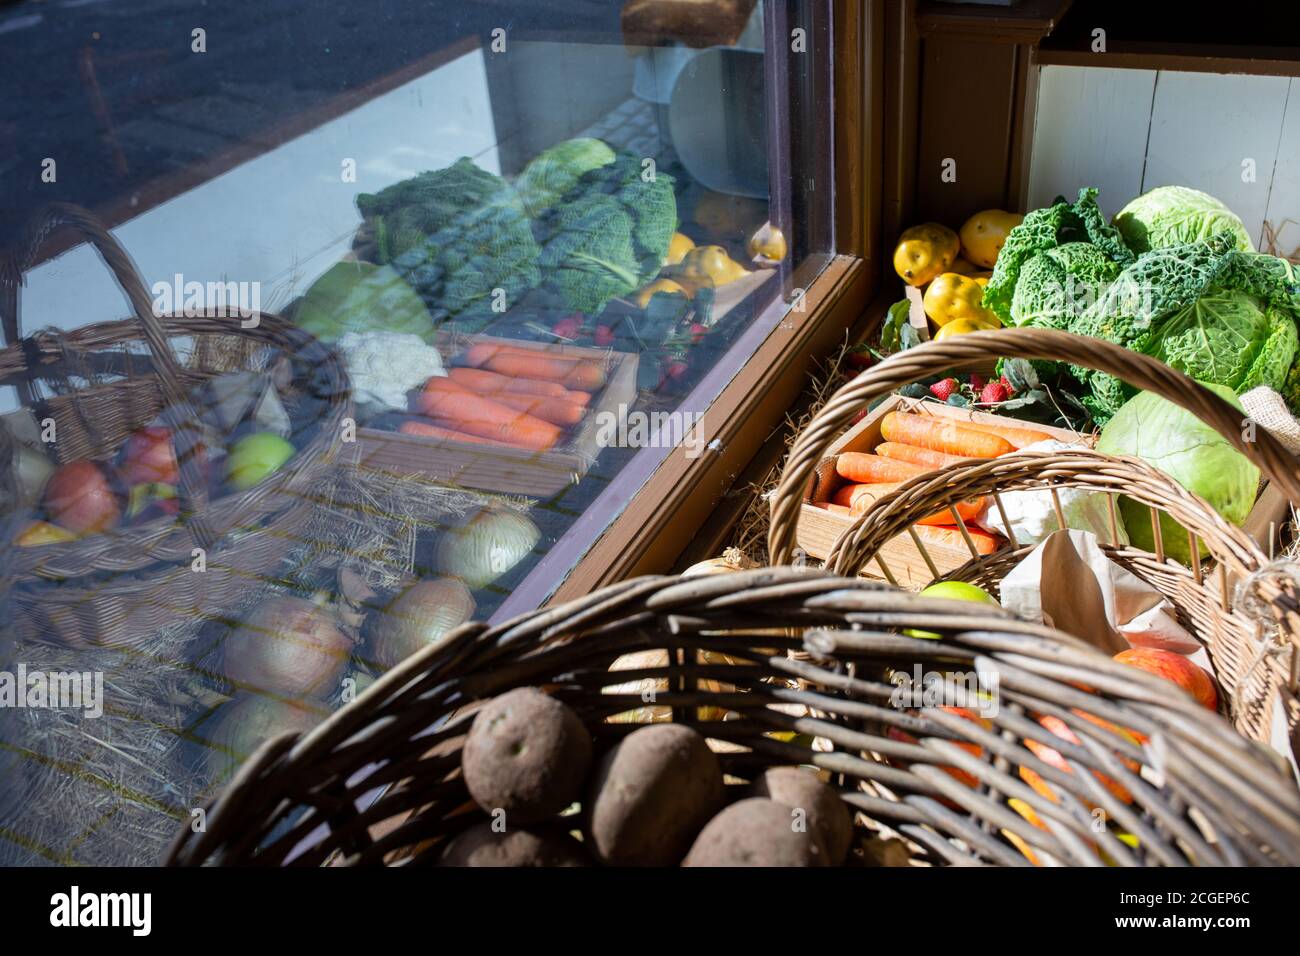 Vegetables on display in an old fashioned British vegetable shop Stock Photo